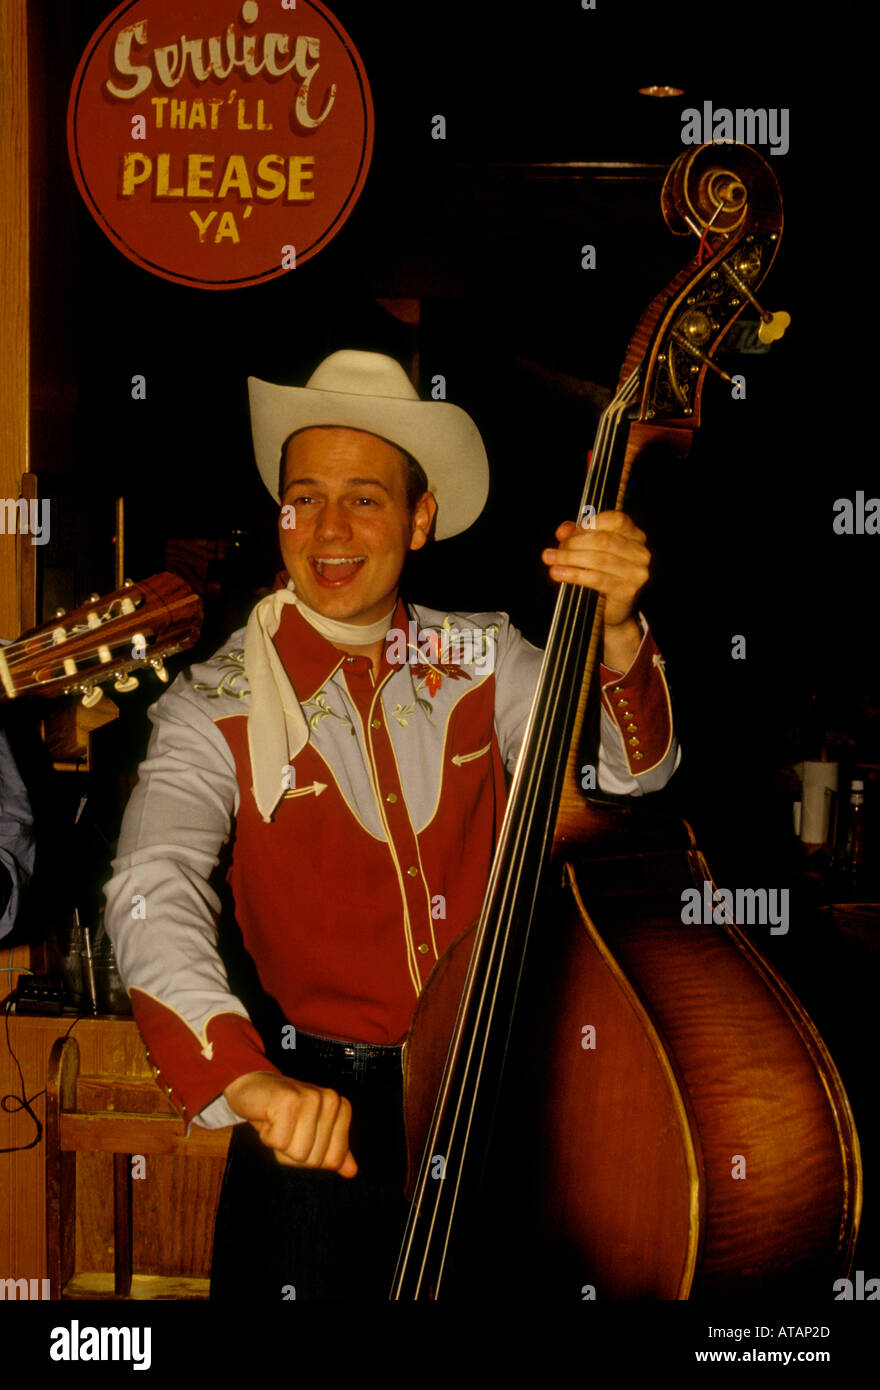 Syd Masters and the Swing Riders band, Syd Masters, Swing Riders band, country music band, trio, Albuquerque, Bernalillo County, New Mexico Stock Photo